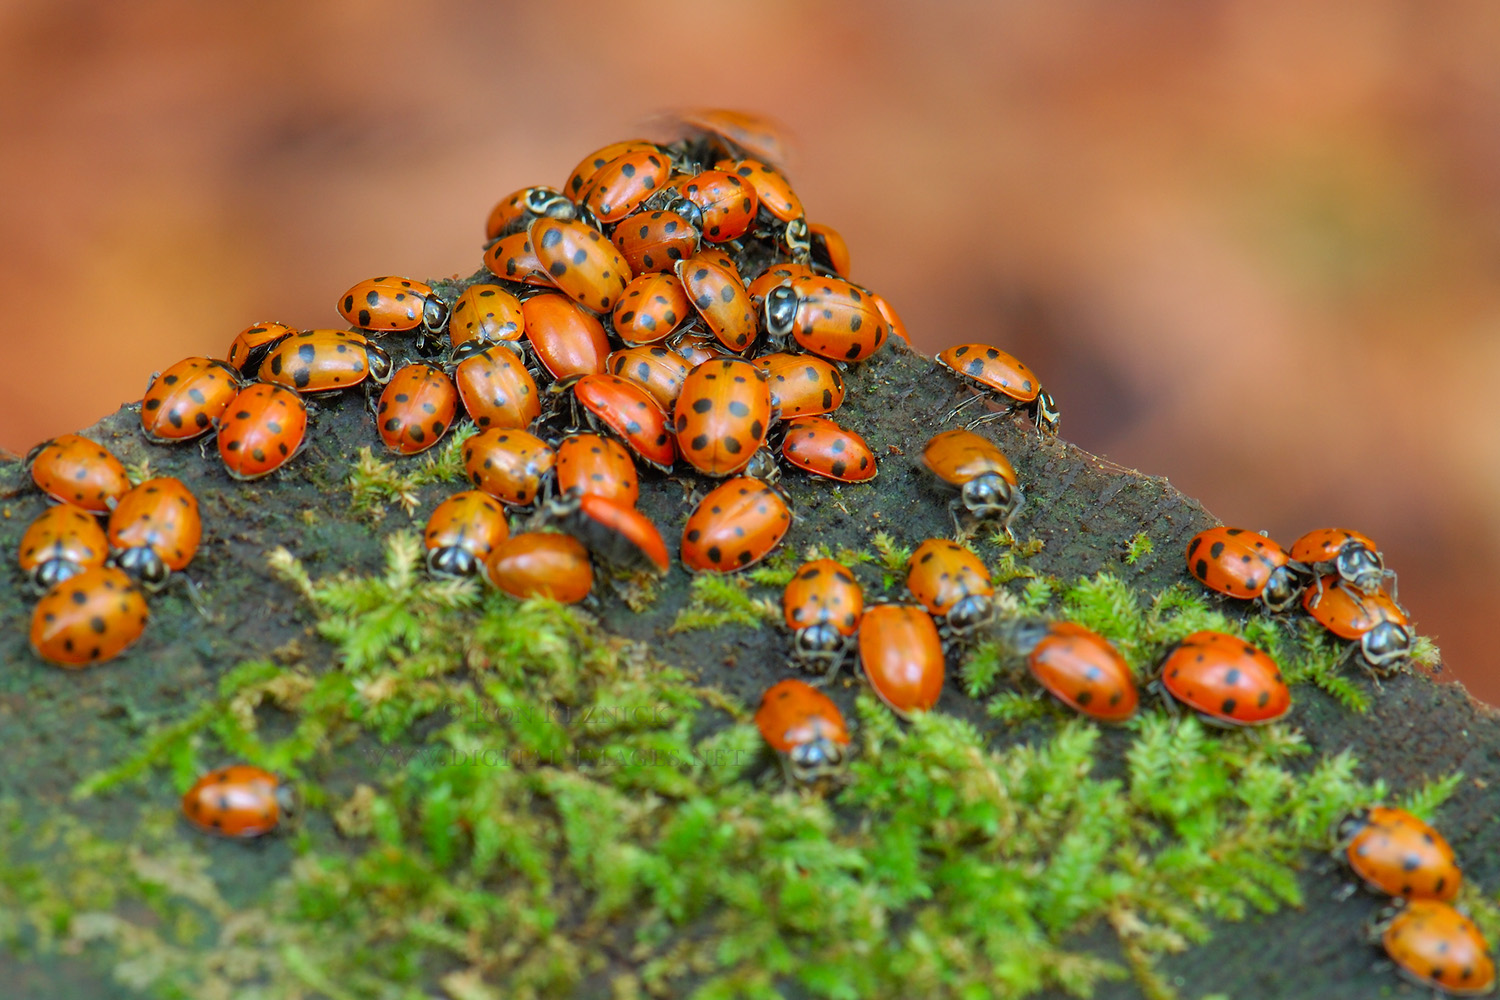 All about Ladybugs